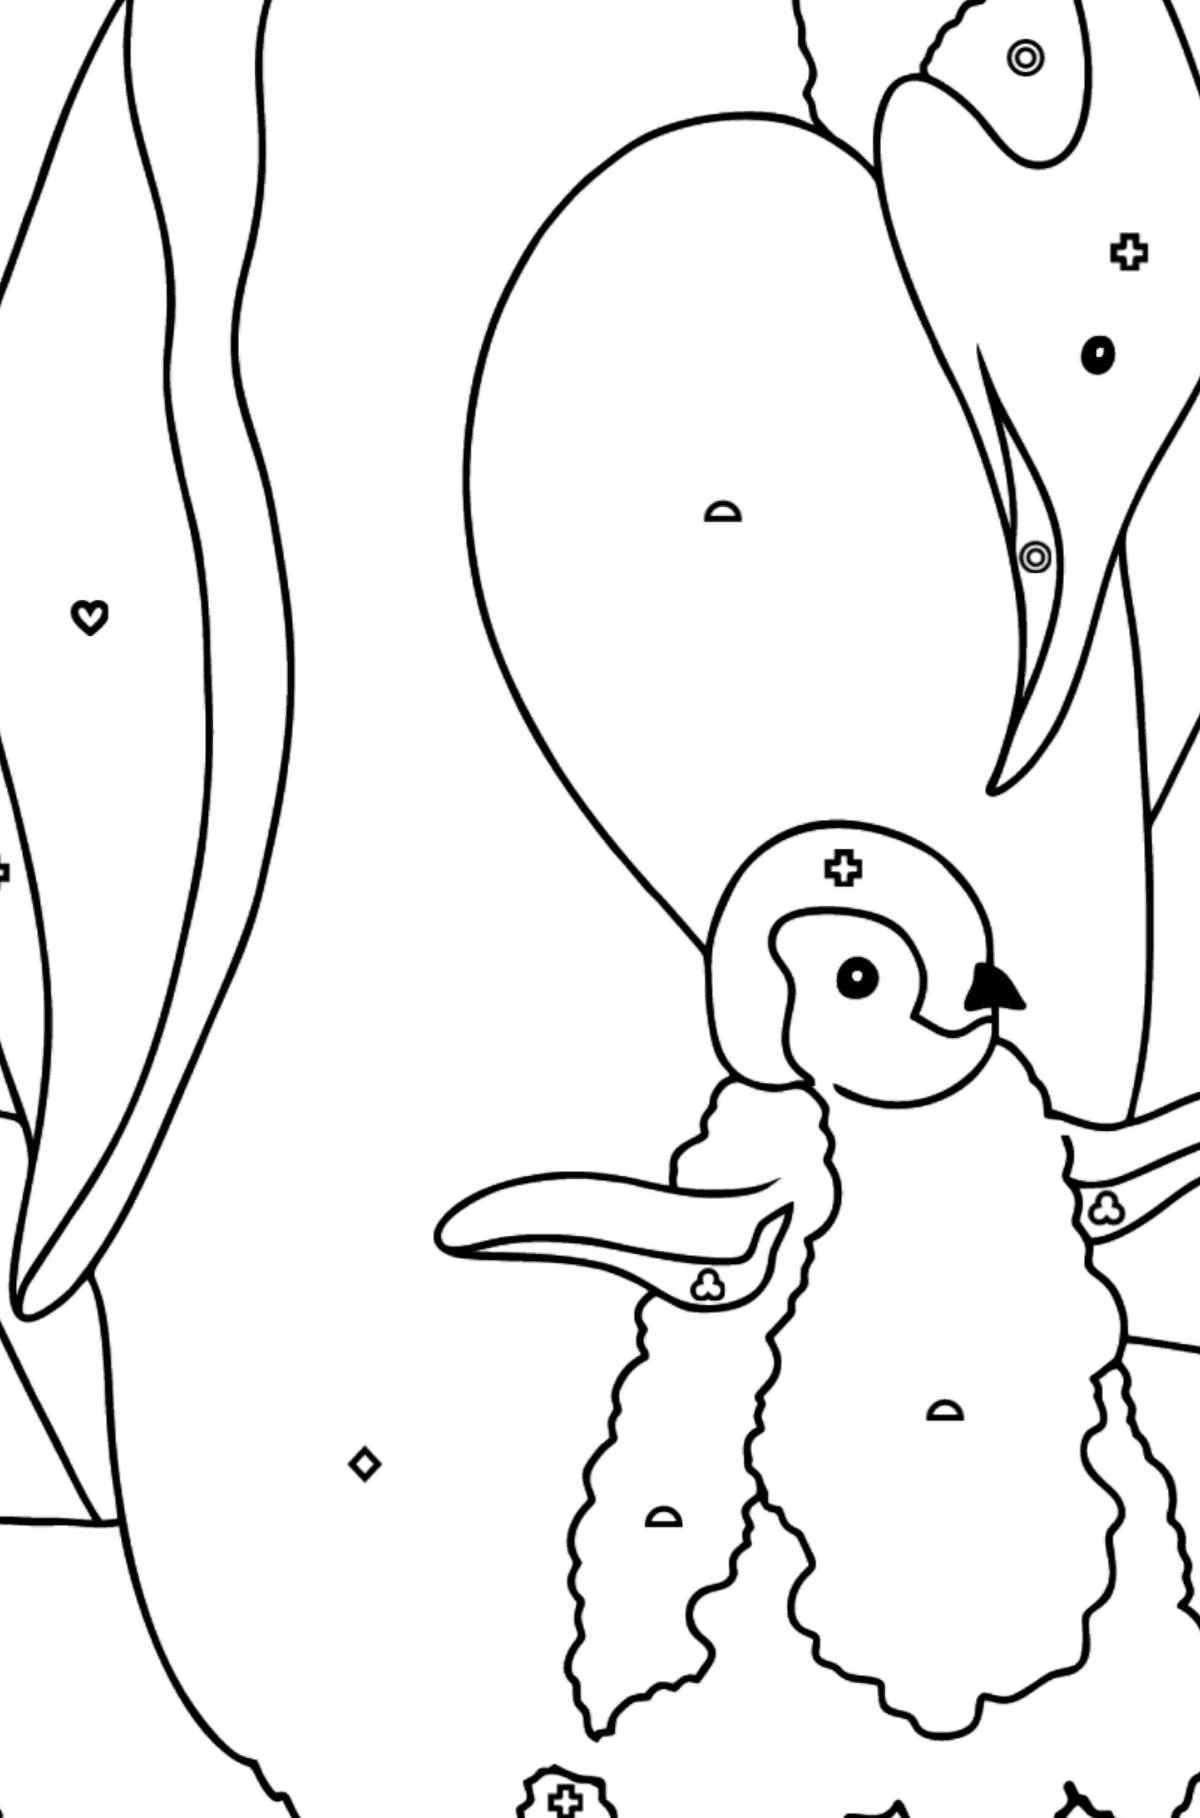 Coloring Page - A Penguin with a Baby - Coloring by Geometric Shapes for Kids